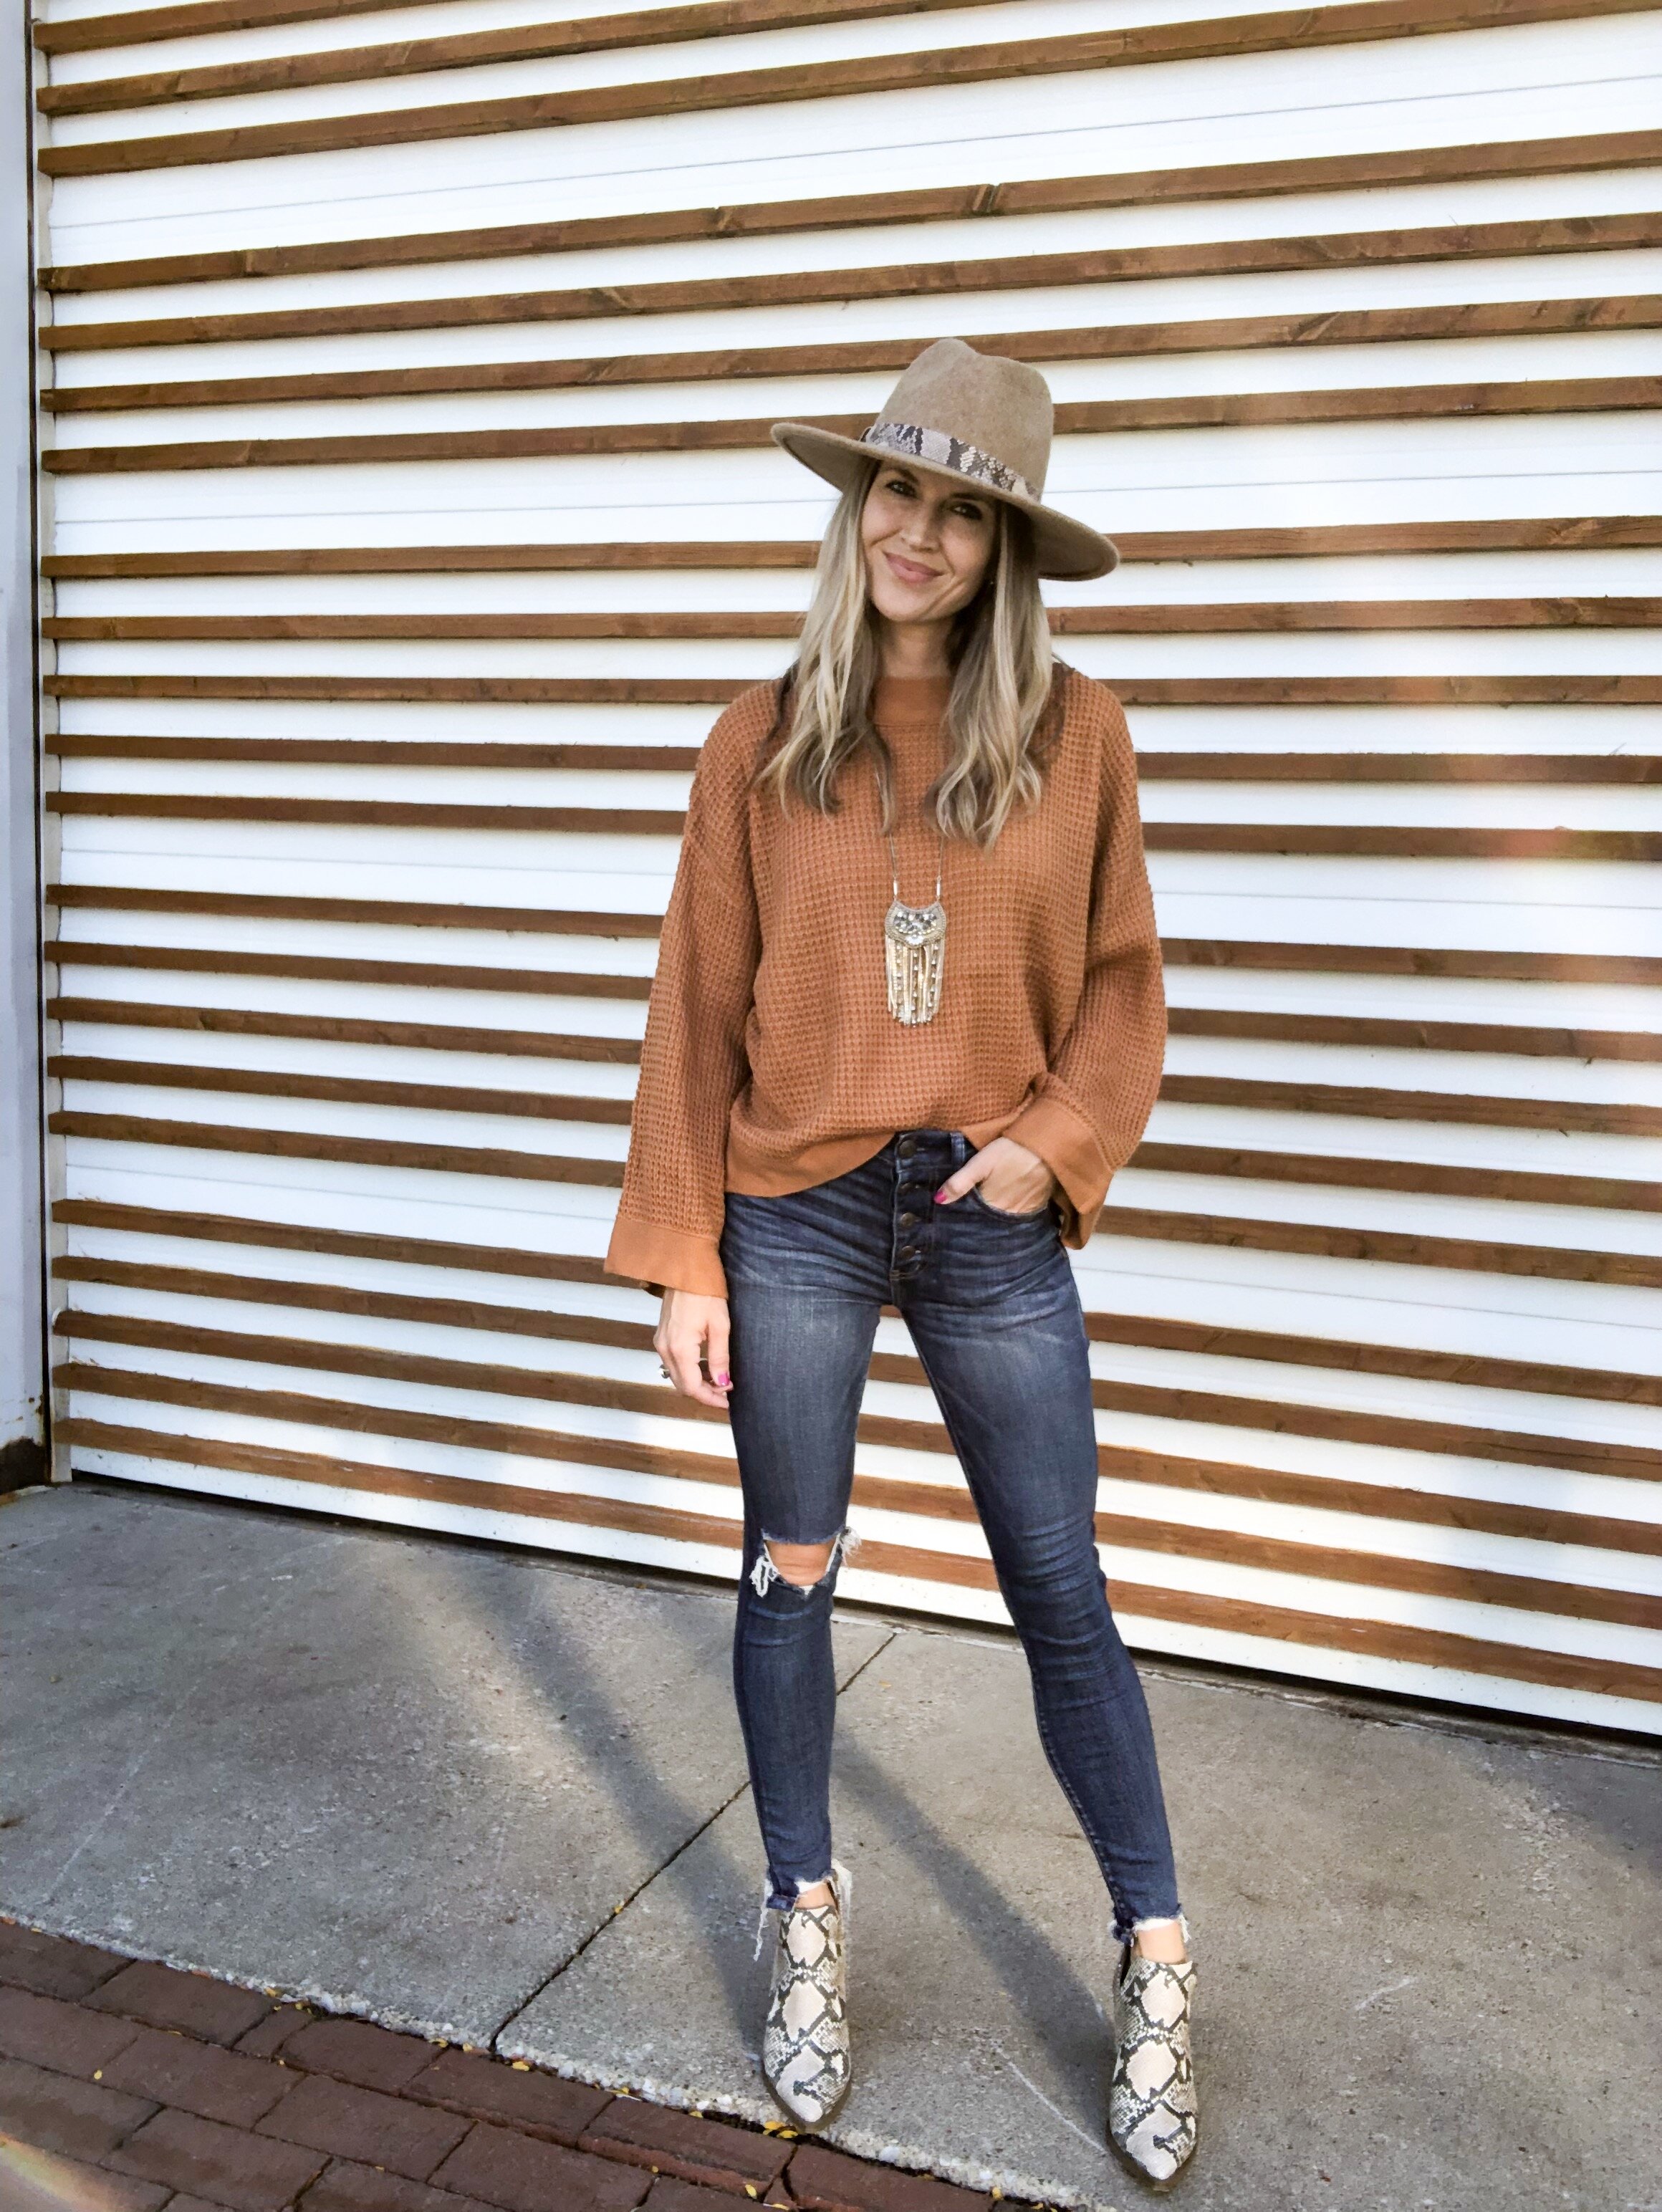 Thanksgiving outfit ideas that are comfy yet elegant